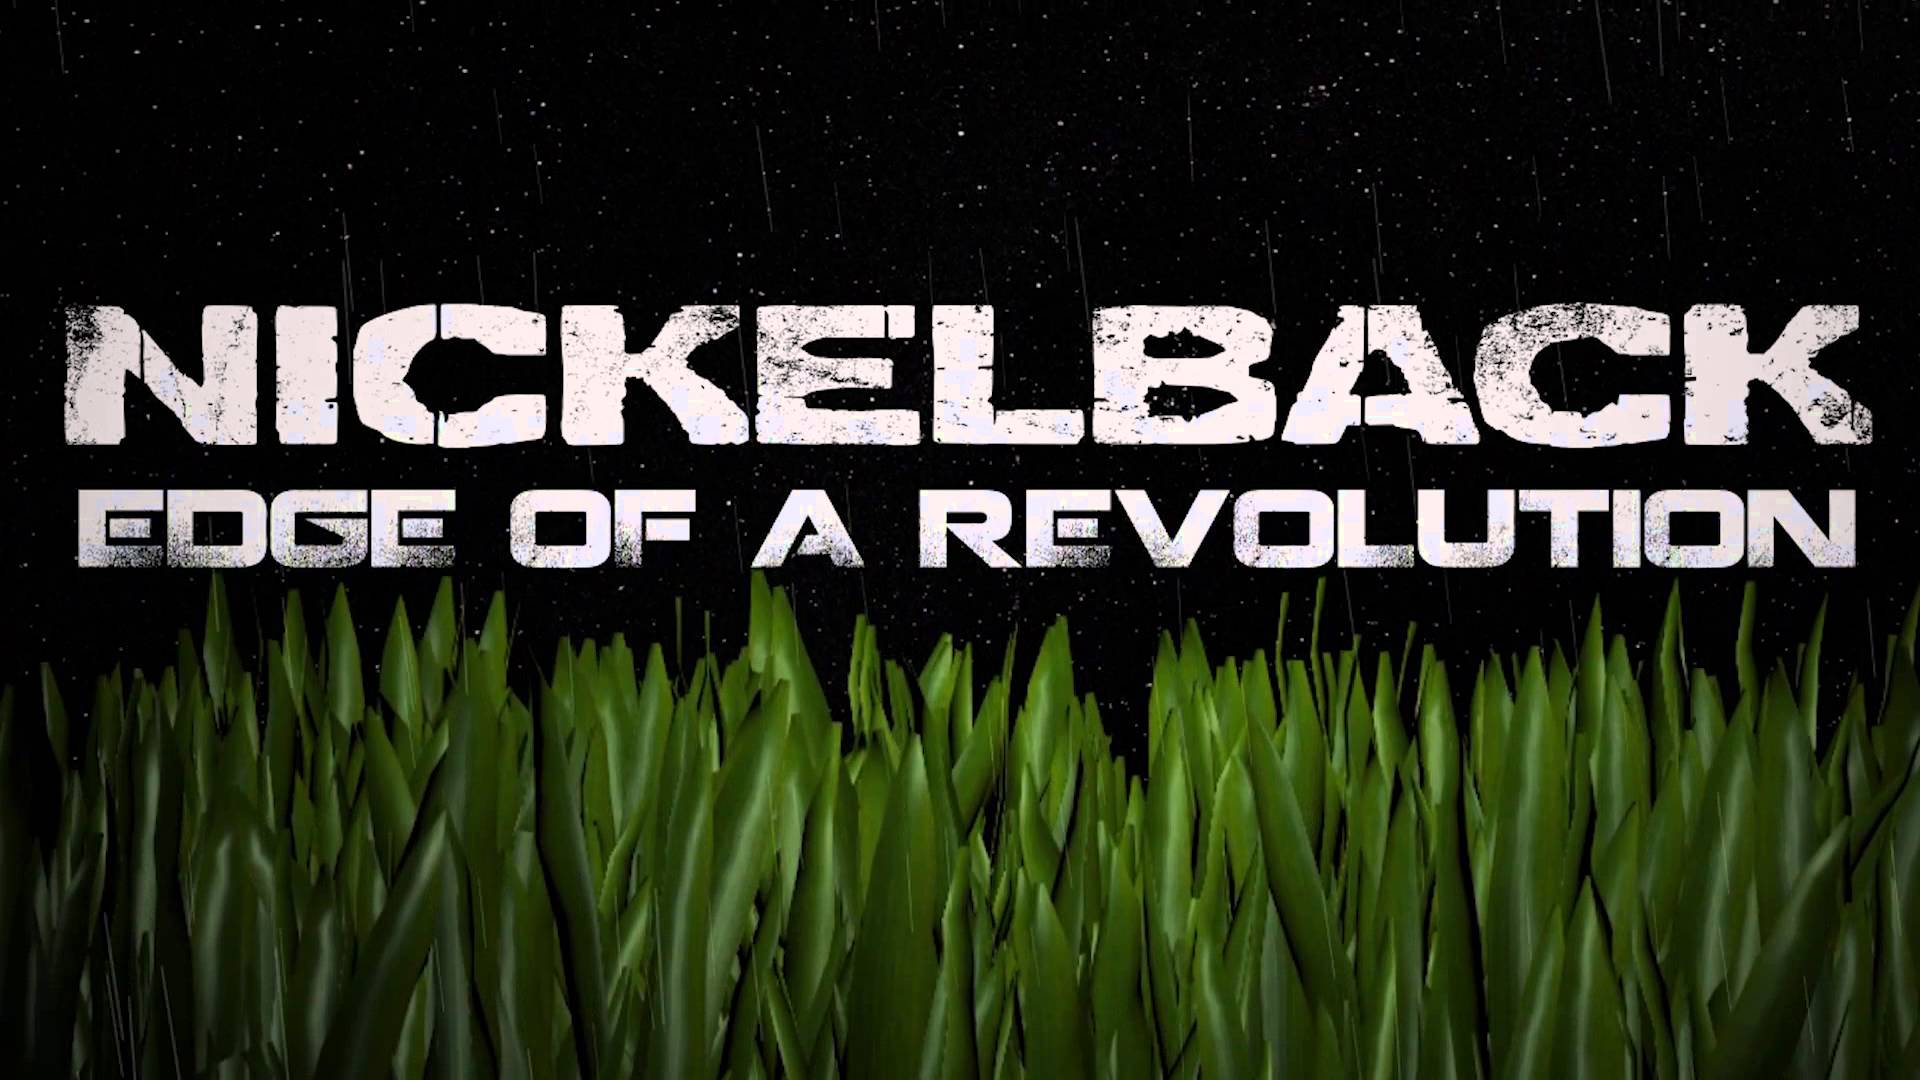 NICKELBACK PREMIERE OFFICIAL MUSIC VIDEO FOR NEW SINGLE “EDGE OF A REVOLUTION”